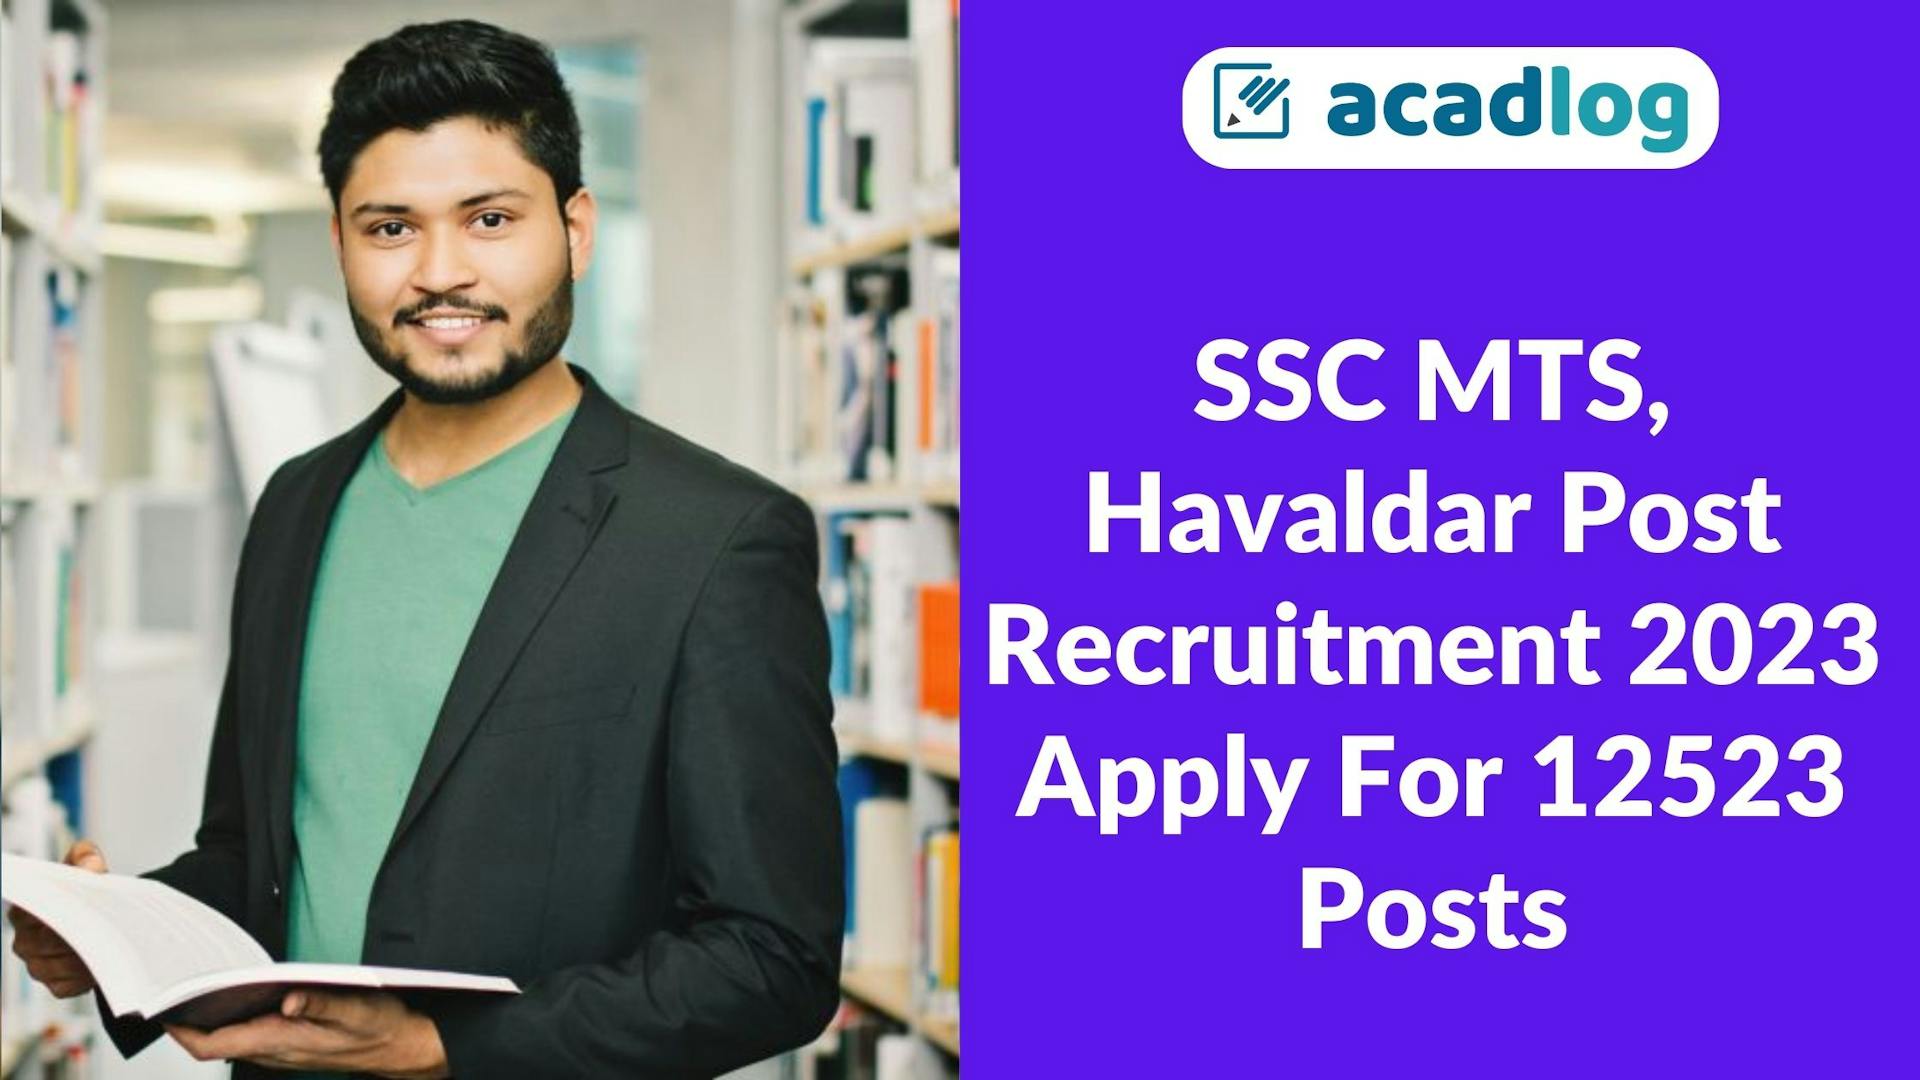 SSC Multi-Tasking (Non-Technical) Staff MTS, and Havaldar (CBIC & CBN) Recruitment 2022 Exam Date for 12523 Post 2023